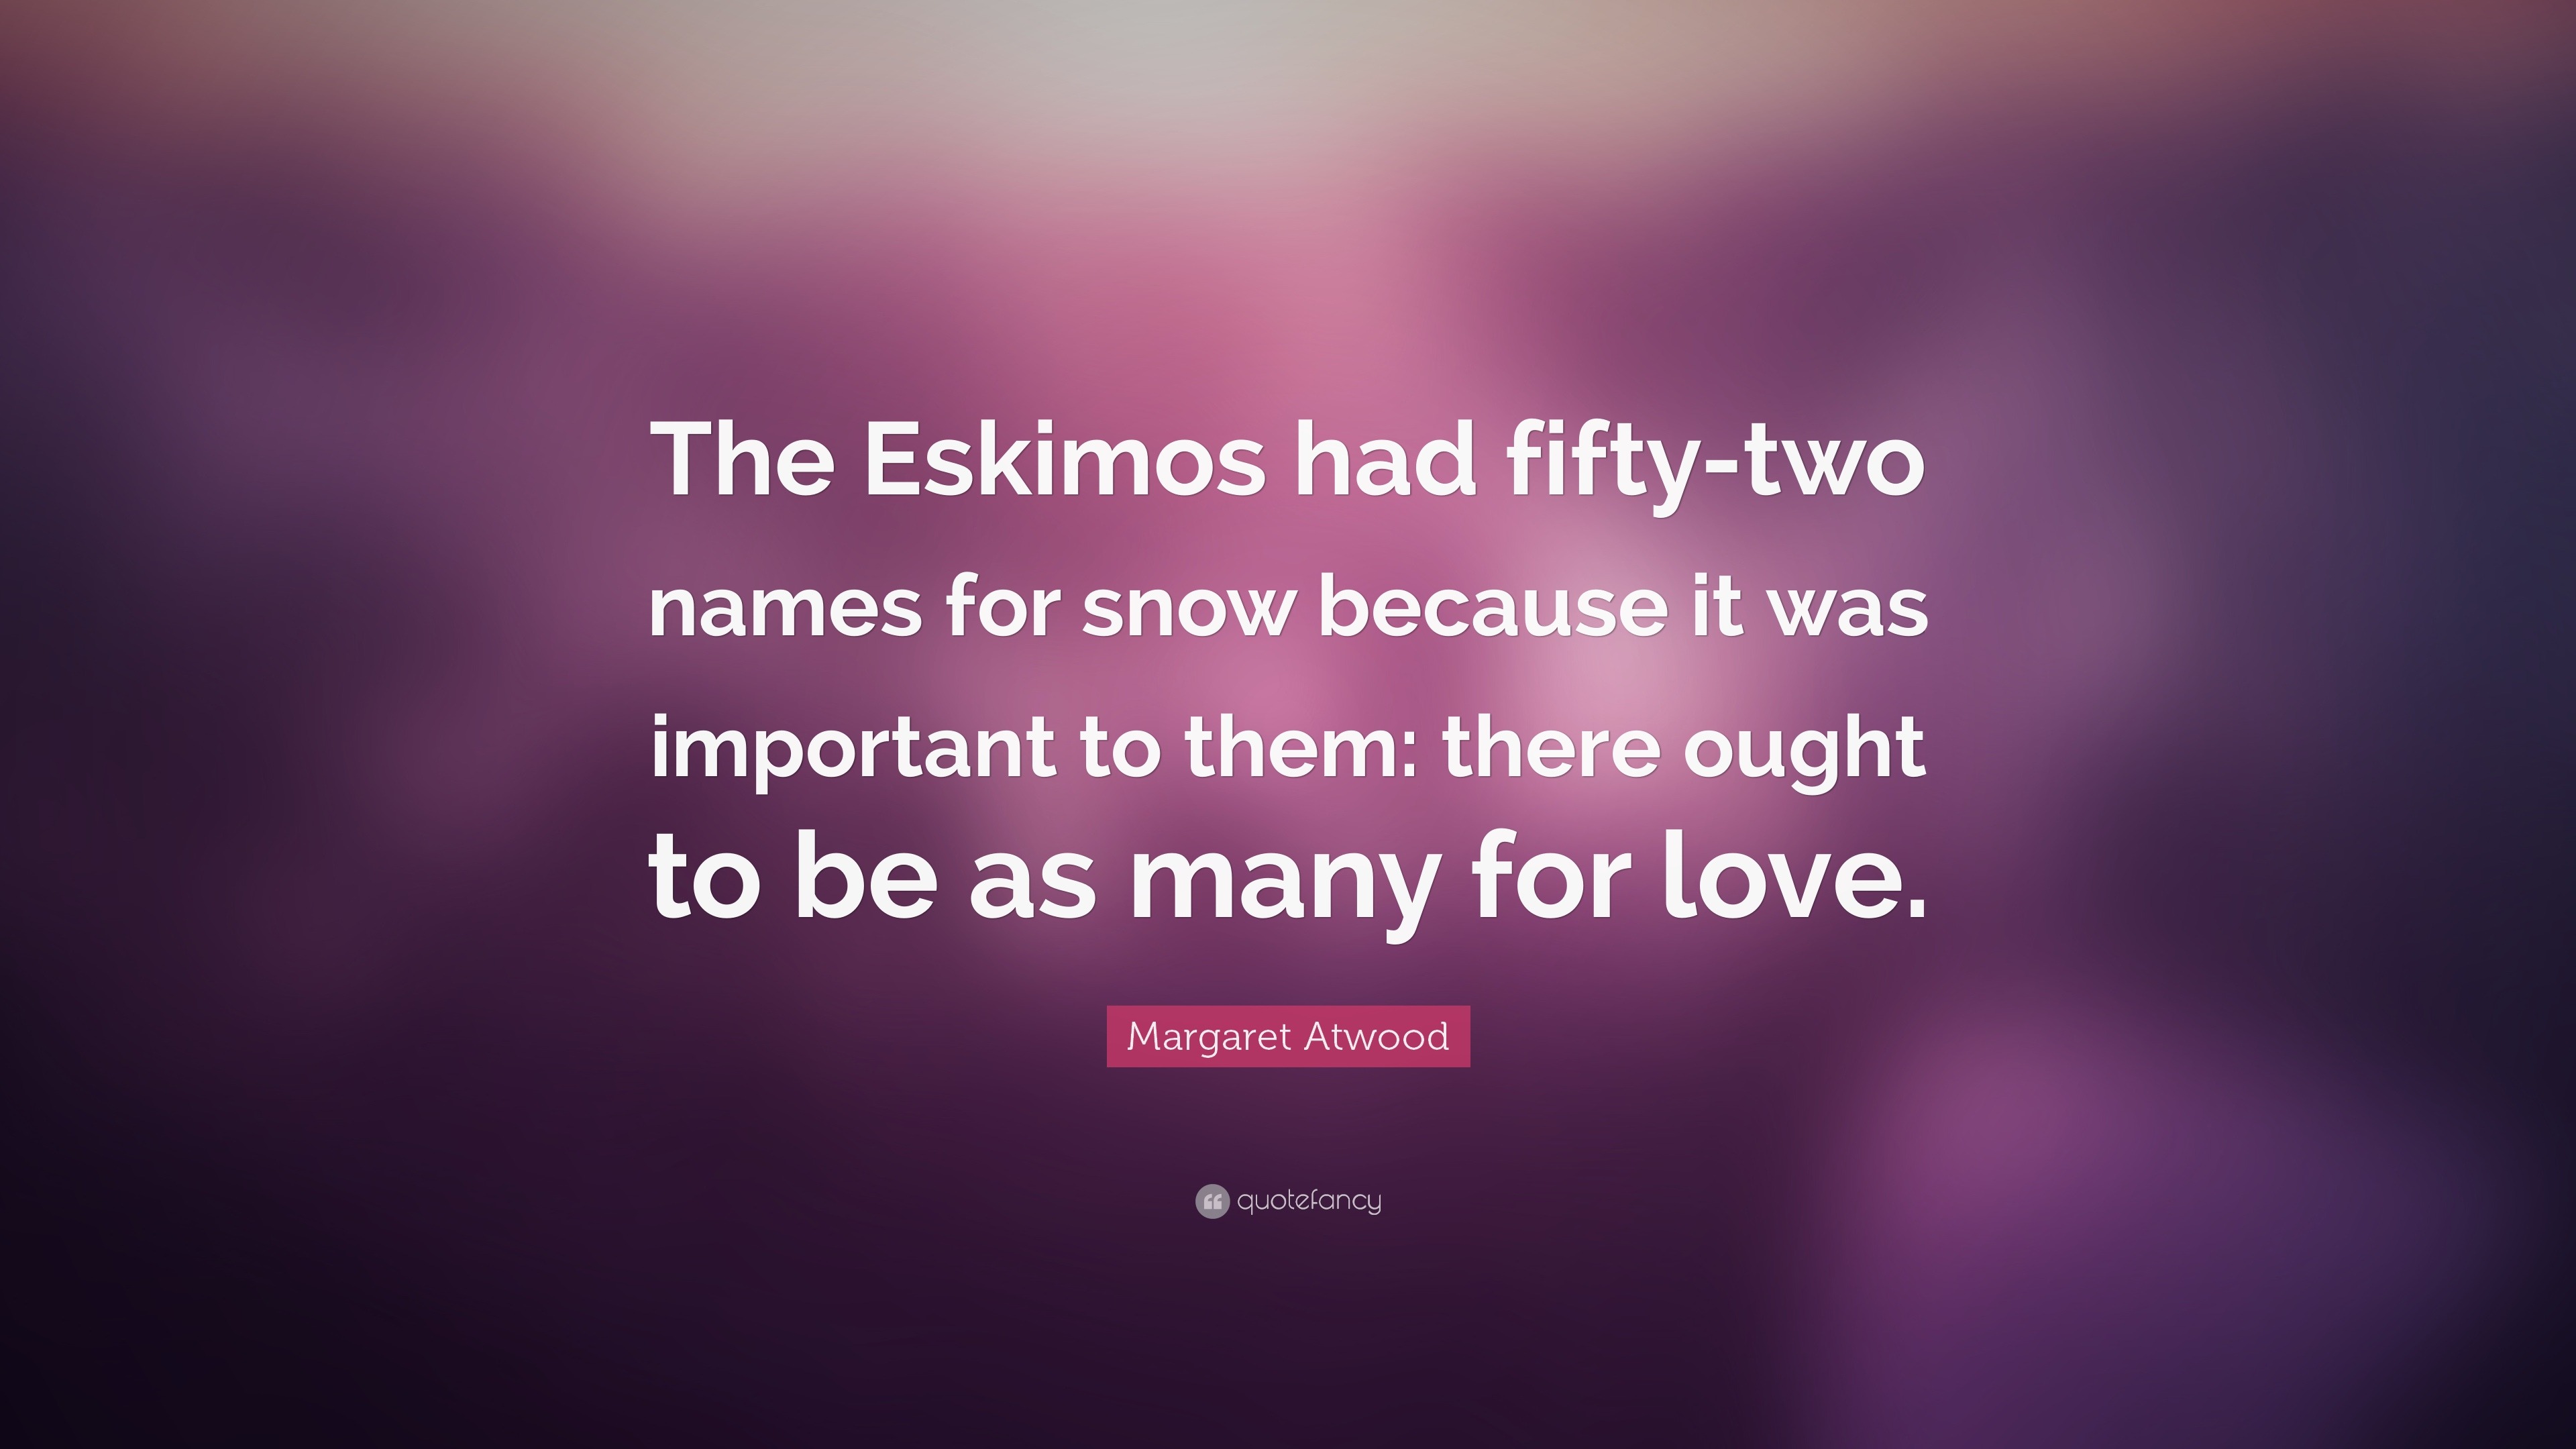 Margaret Atwood Quote: "The Eskimos had fifty-two names for snow because it was important to ...